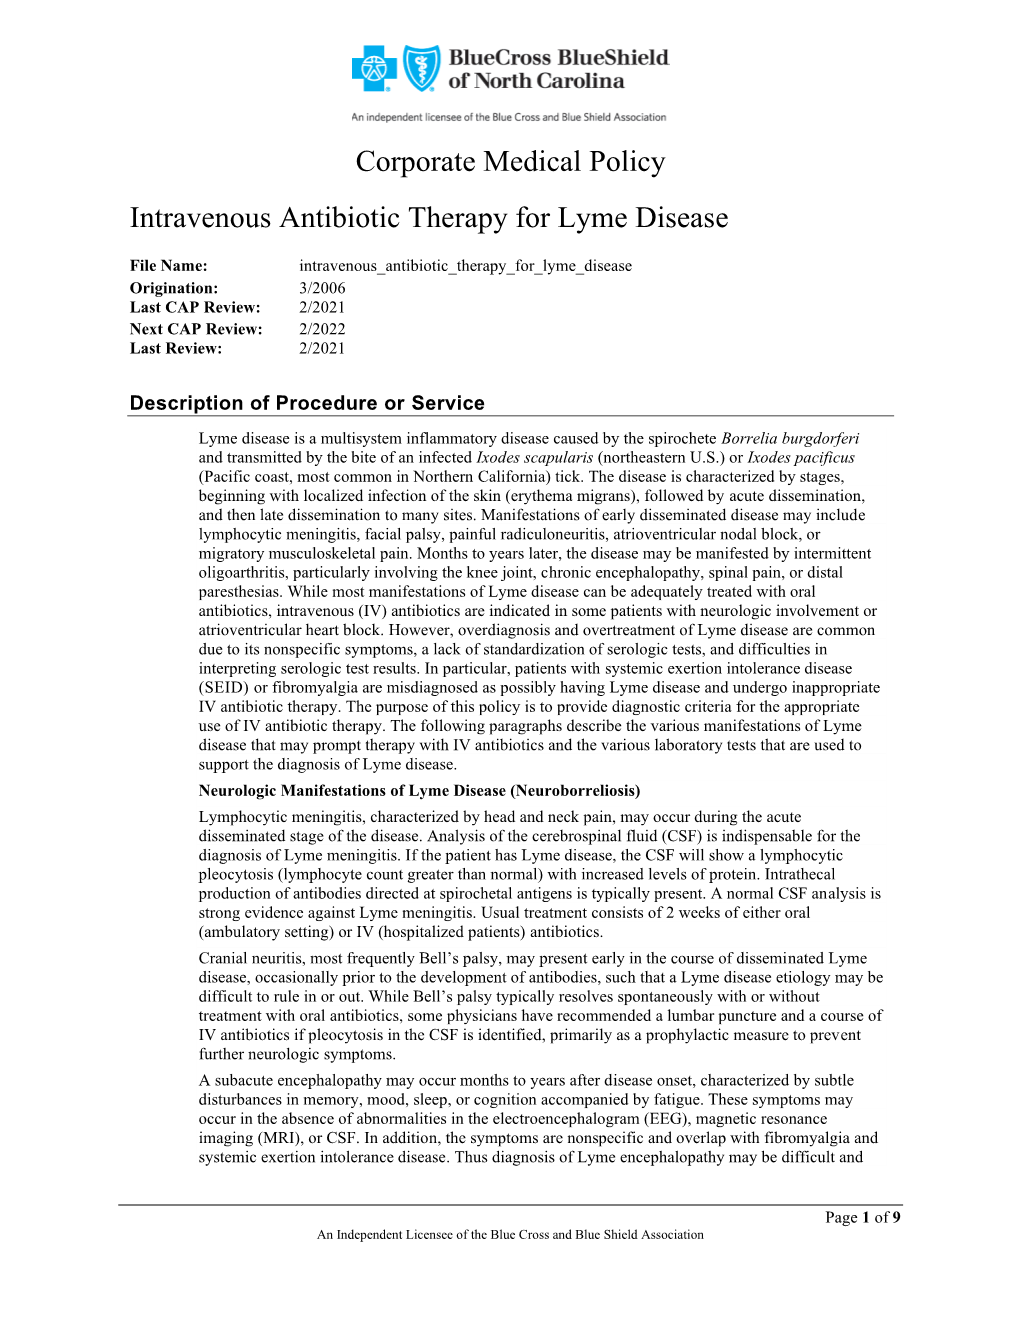 Intravenous Antibiotic Therapy for Lyme Disease